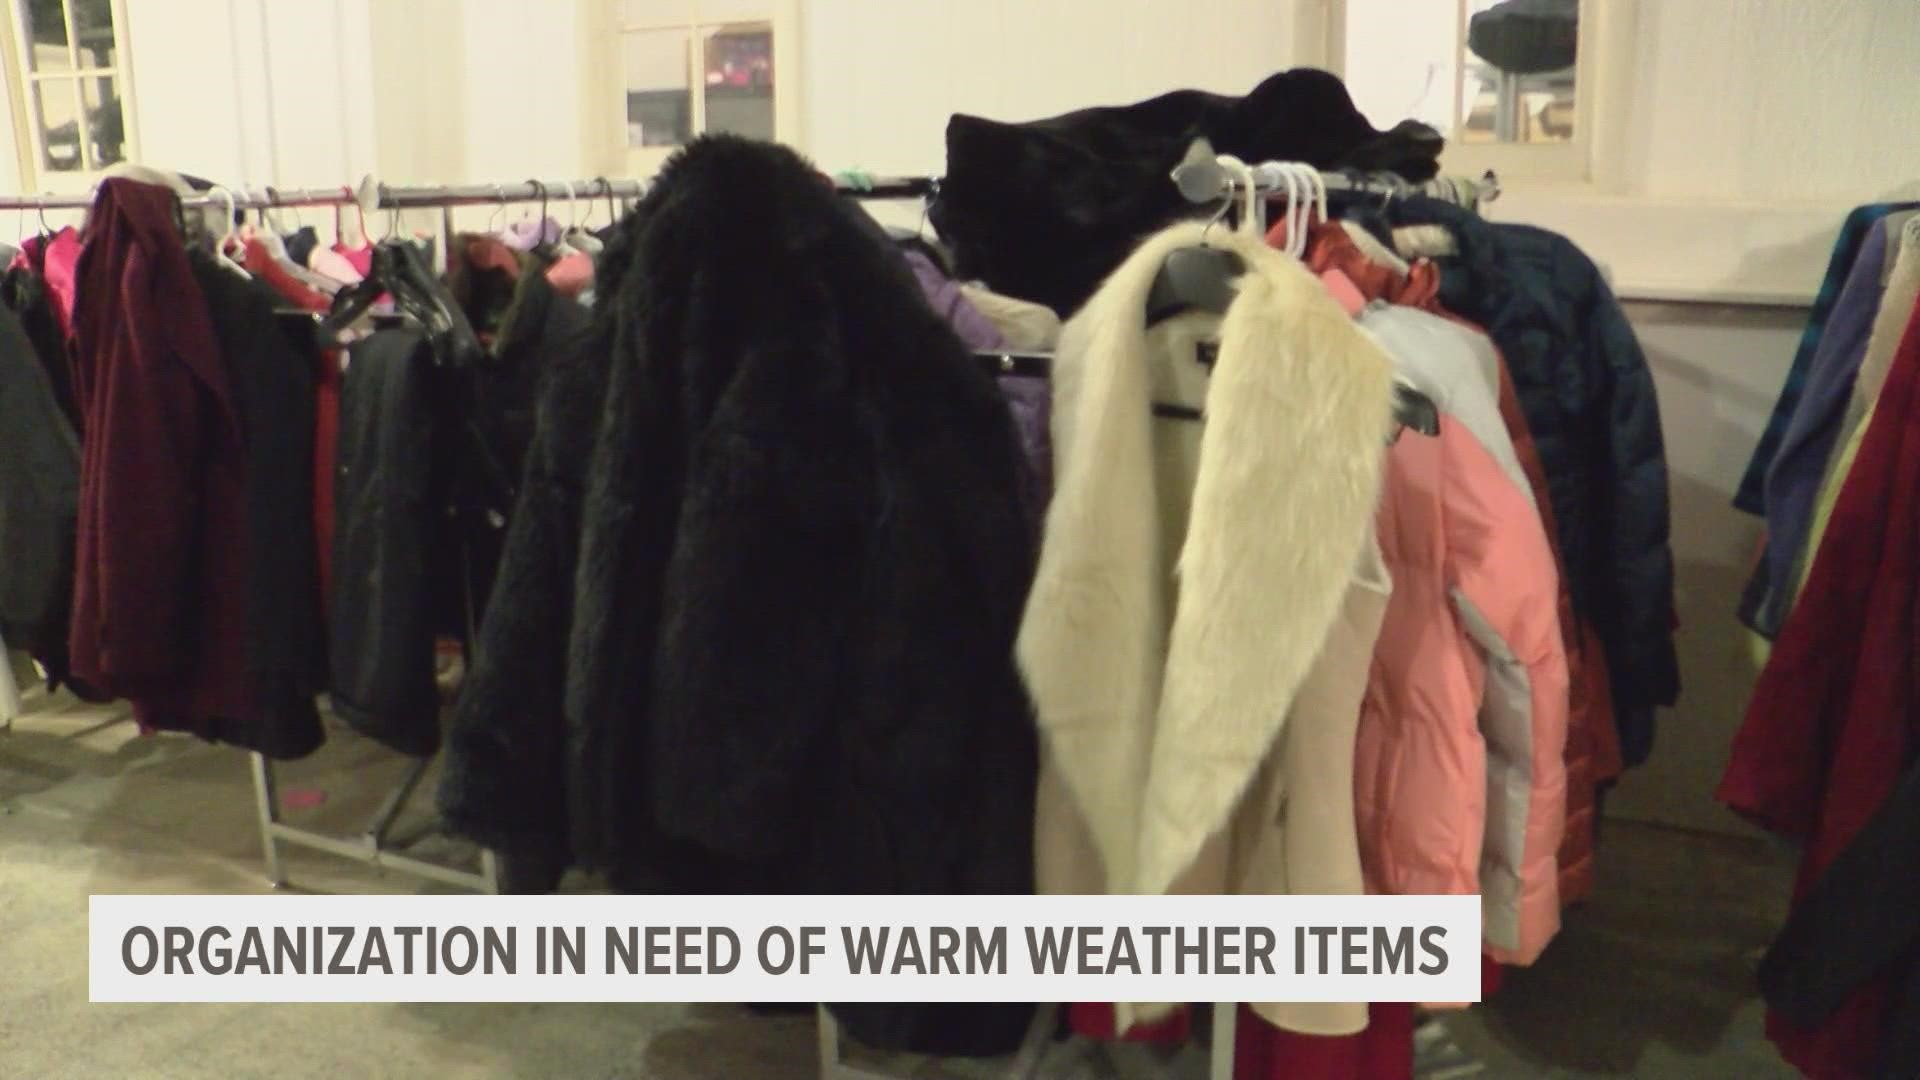 Donations are down this year at Iowa Homeless Youth Centers. So, they are asking for donations to help keep homeless youth in the area warm this winter.